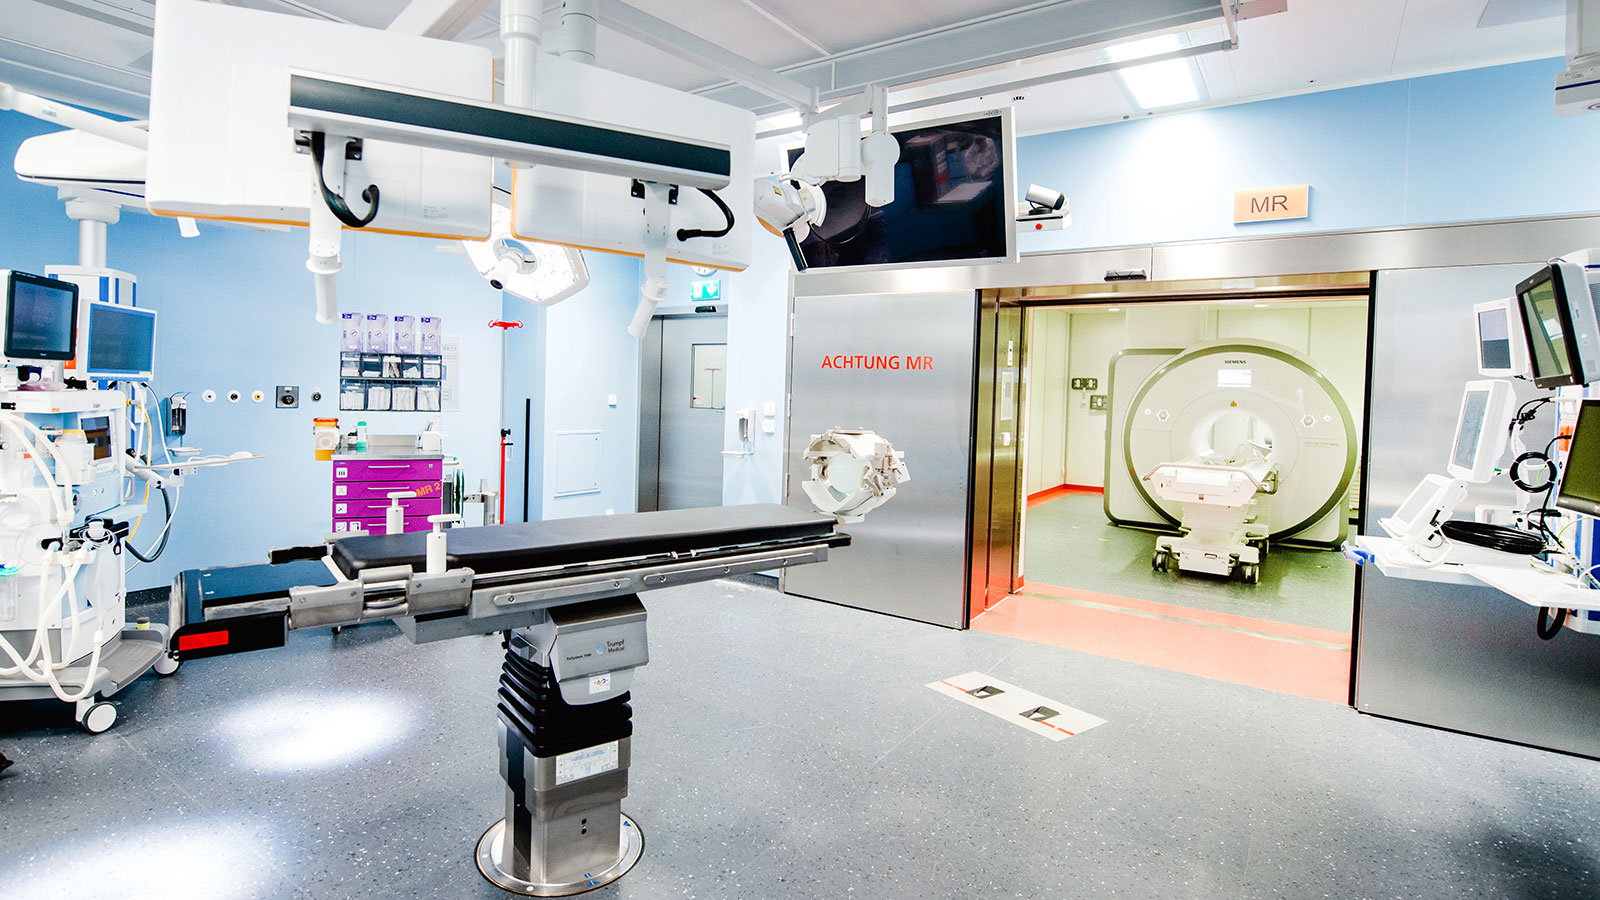 Operating room with operating table in the foreground and high-field MRI directly connected to the operating room in the background